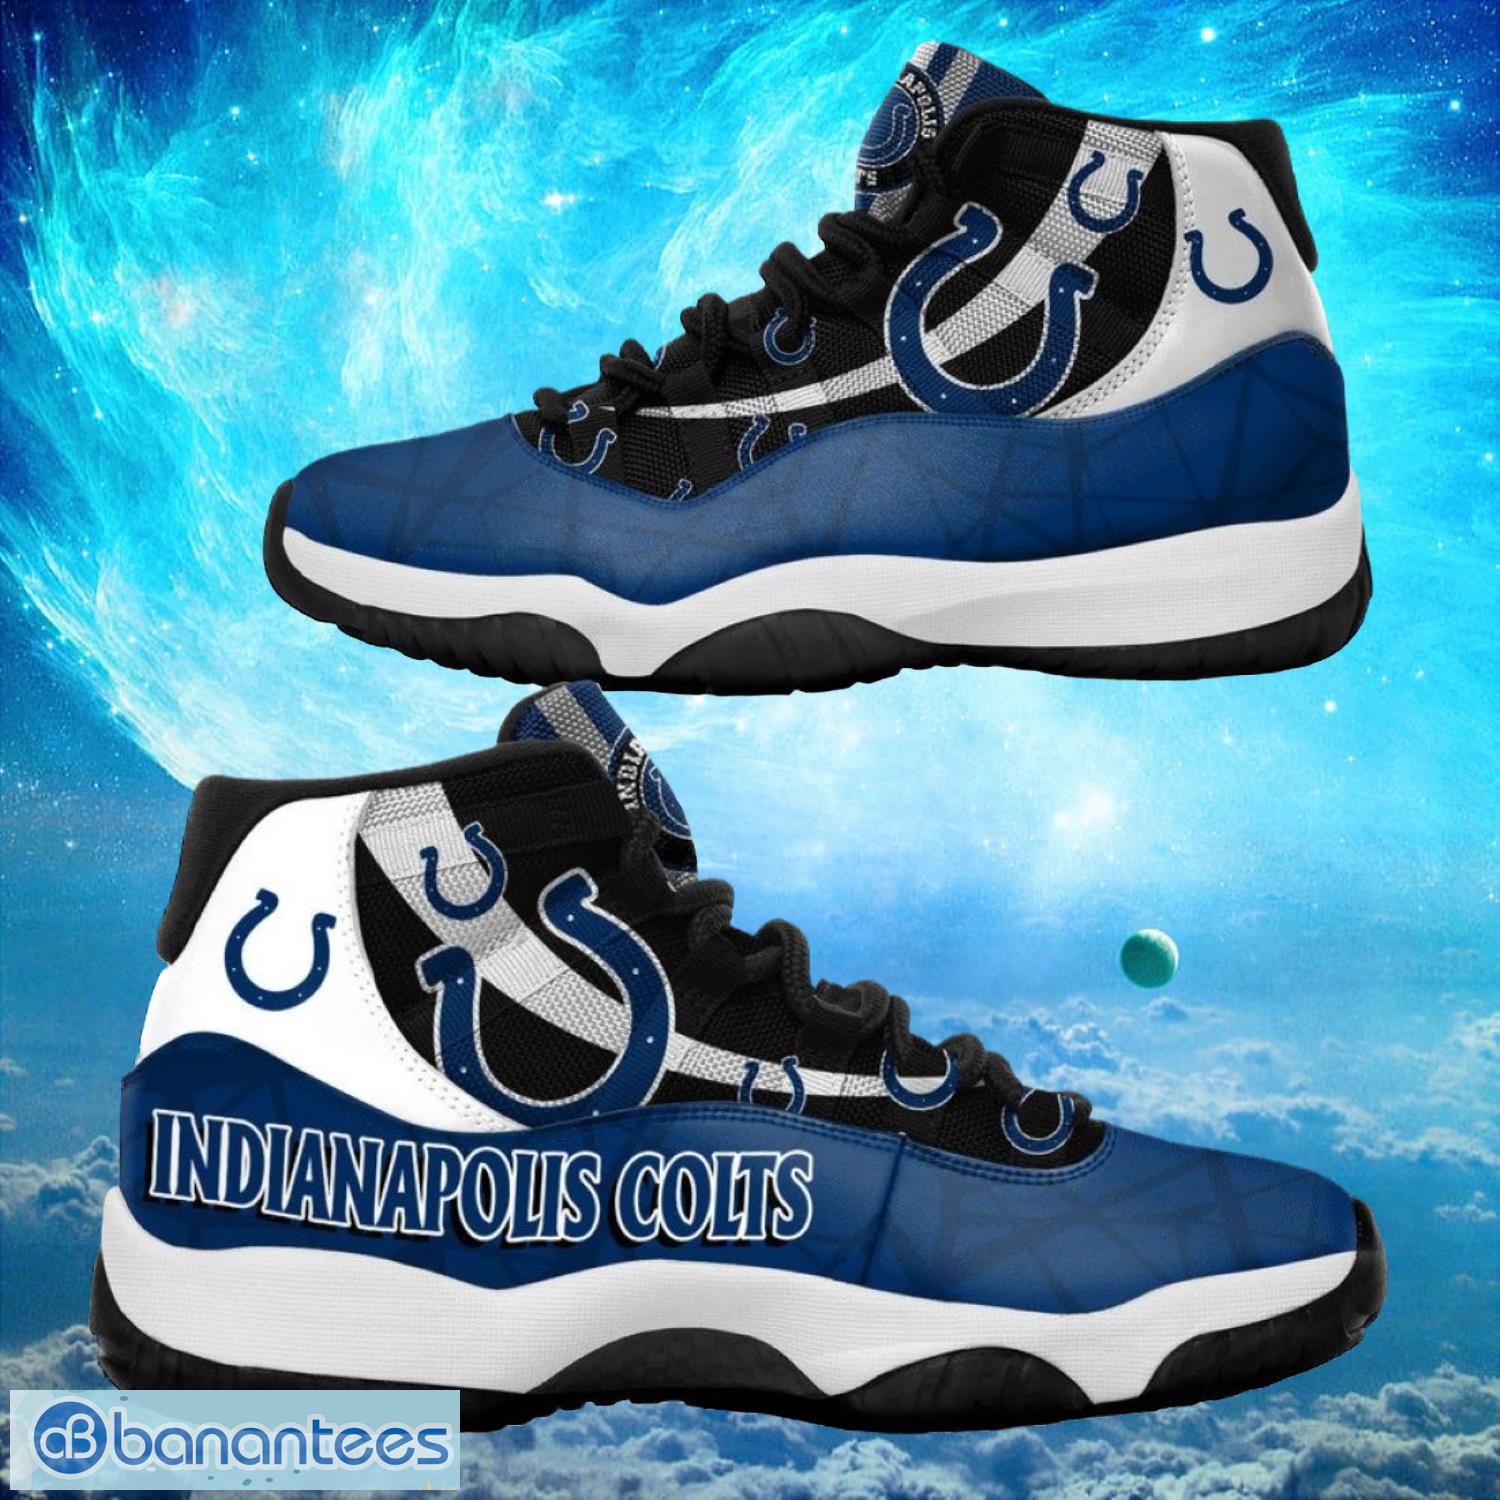 Indianapolis Colts NFL Air Jordan 11 Sneakers Shoes Gift For Fans Product Photo 1